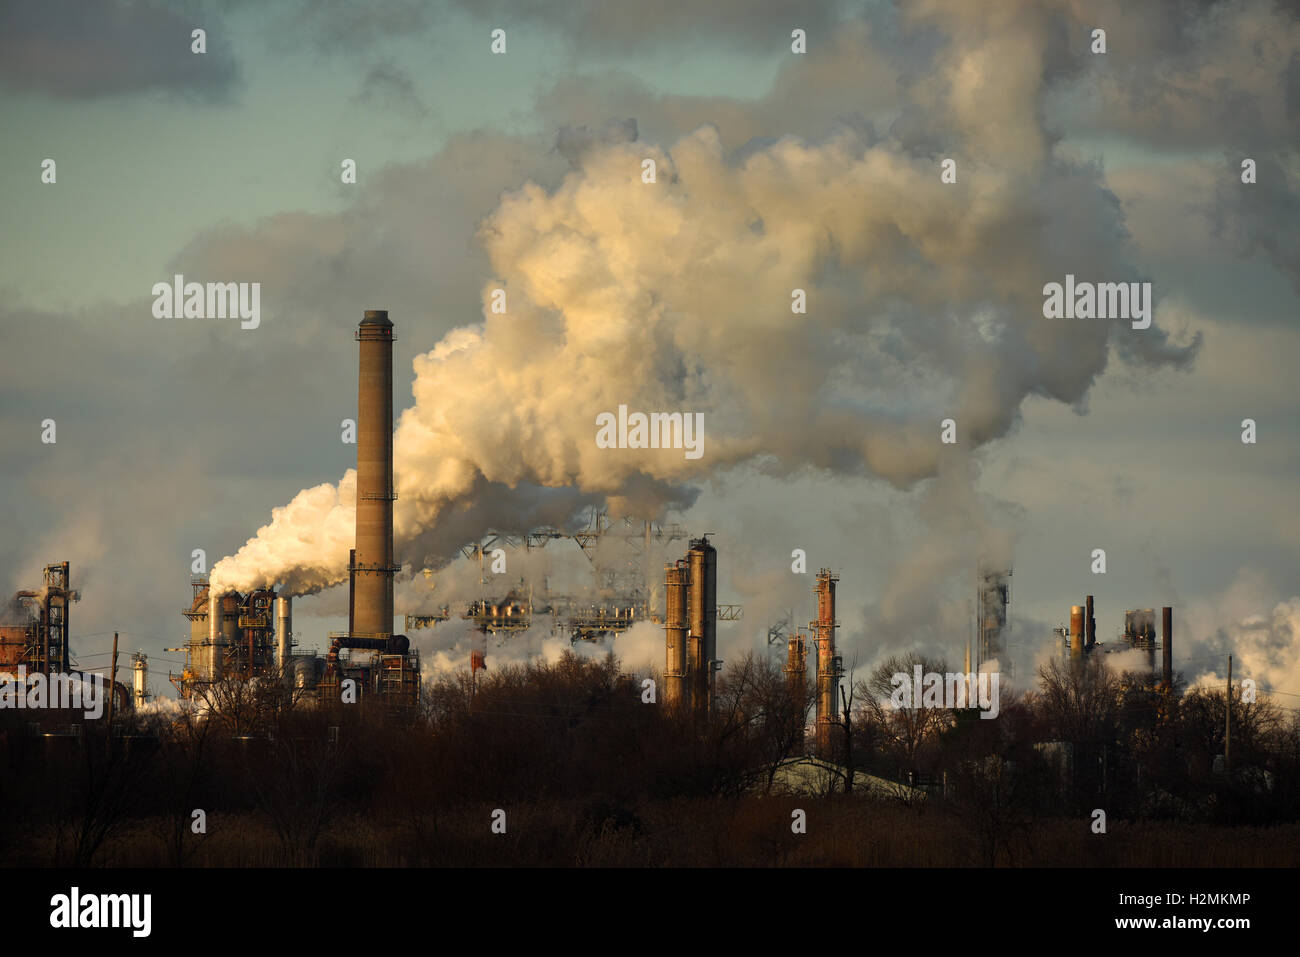 Heavy smoke being released from smokestacks in late afternoon Stock Photo